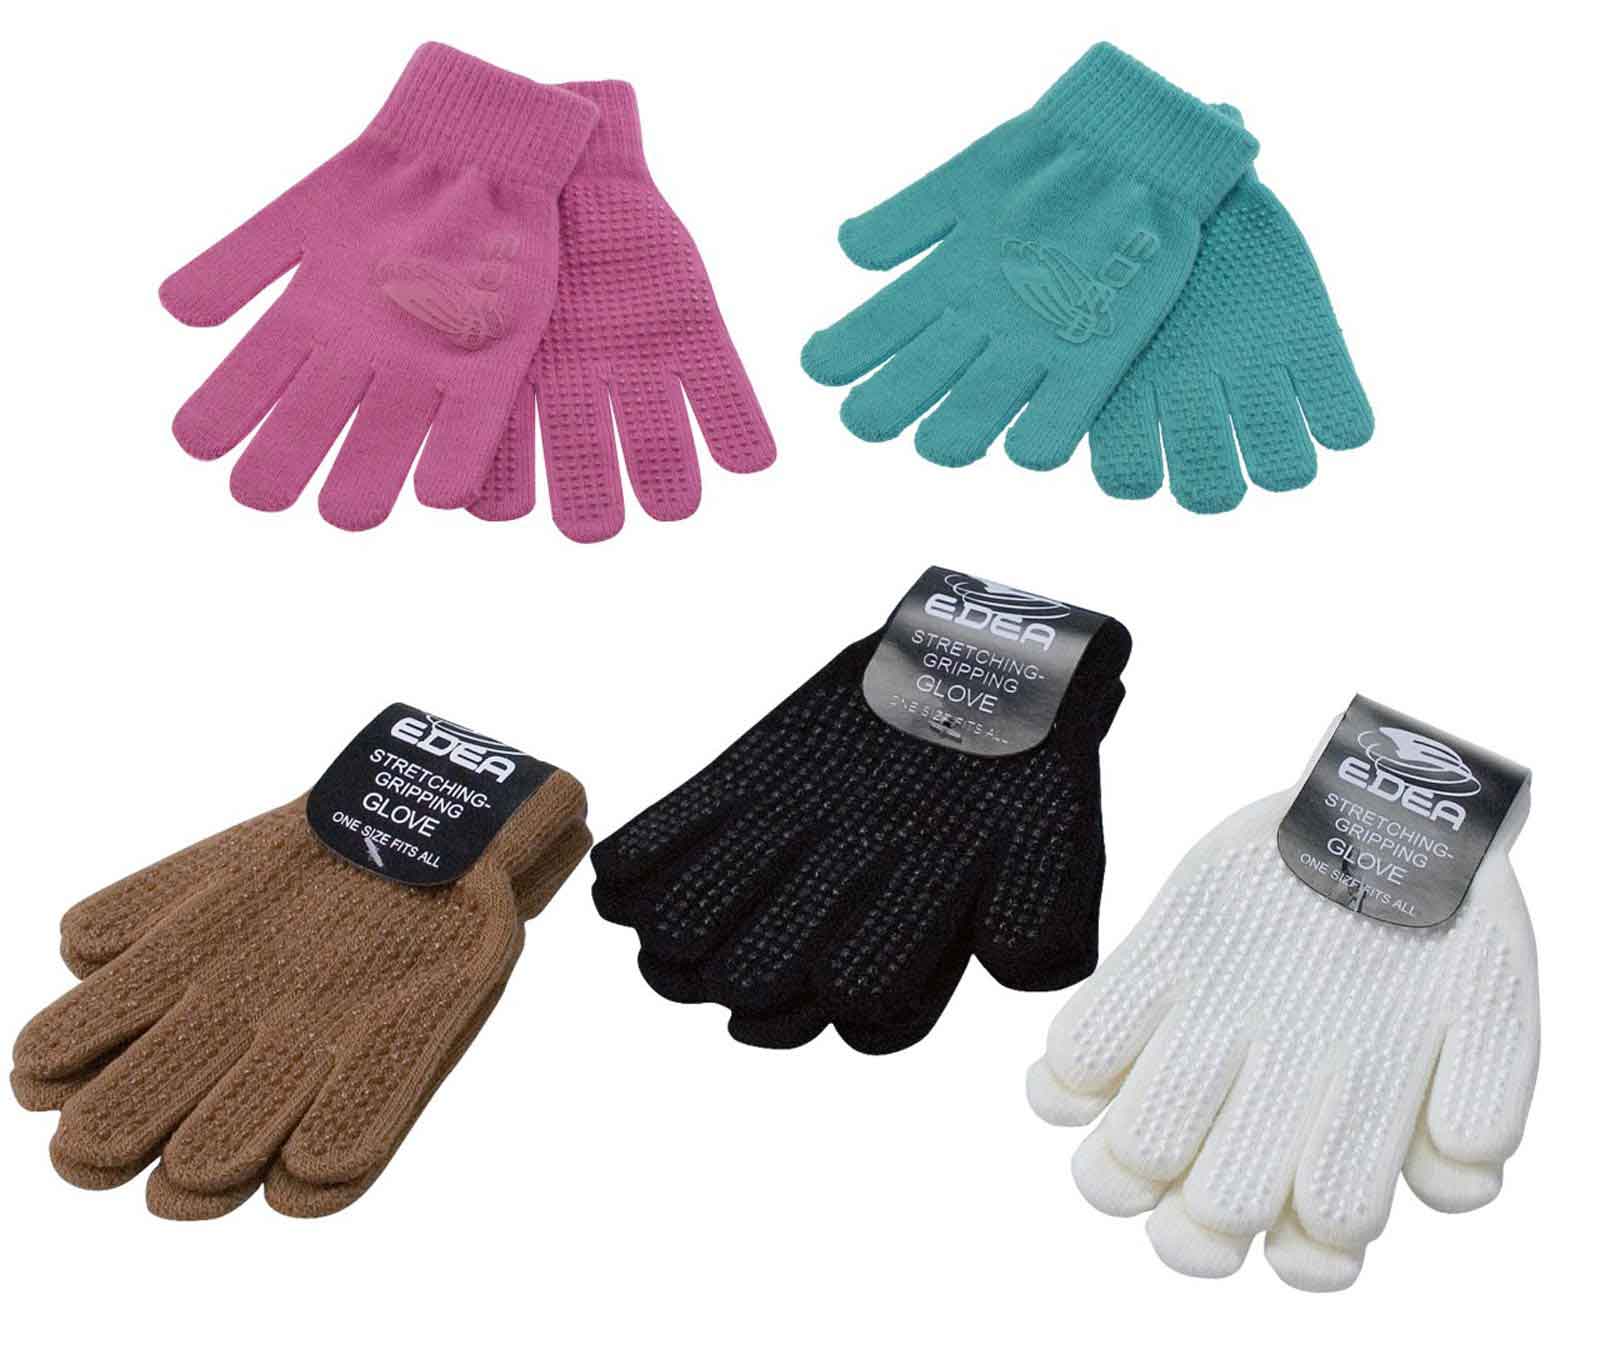 Gripping gloves all colors